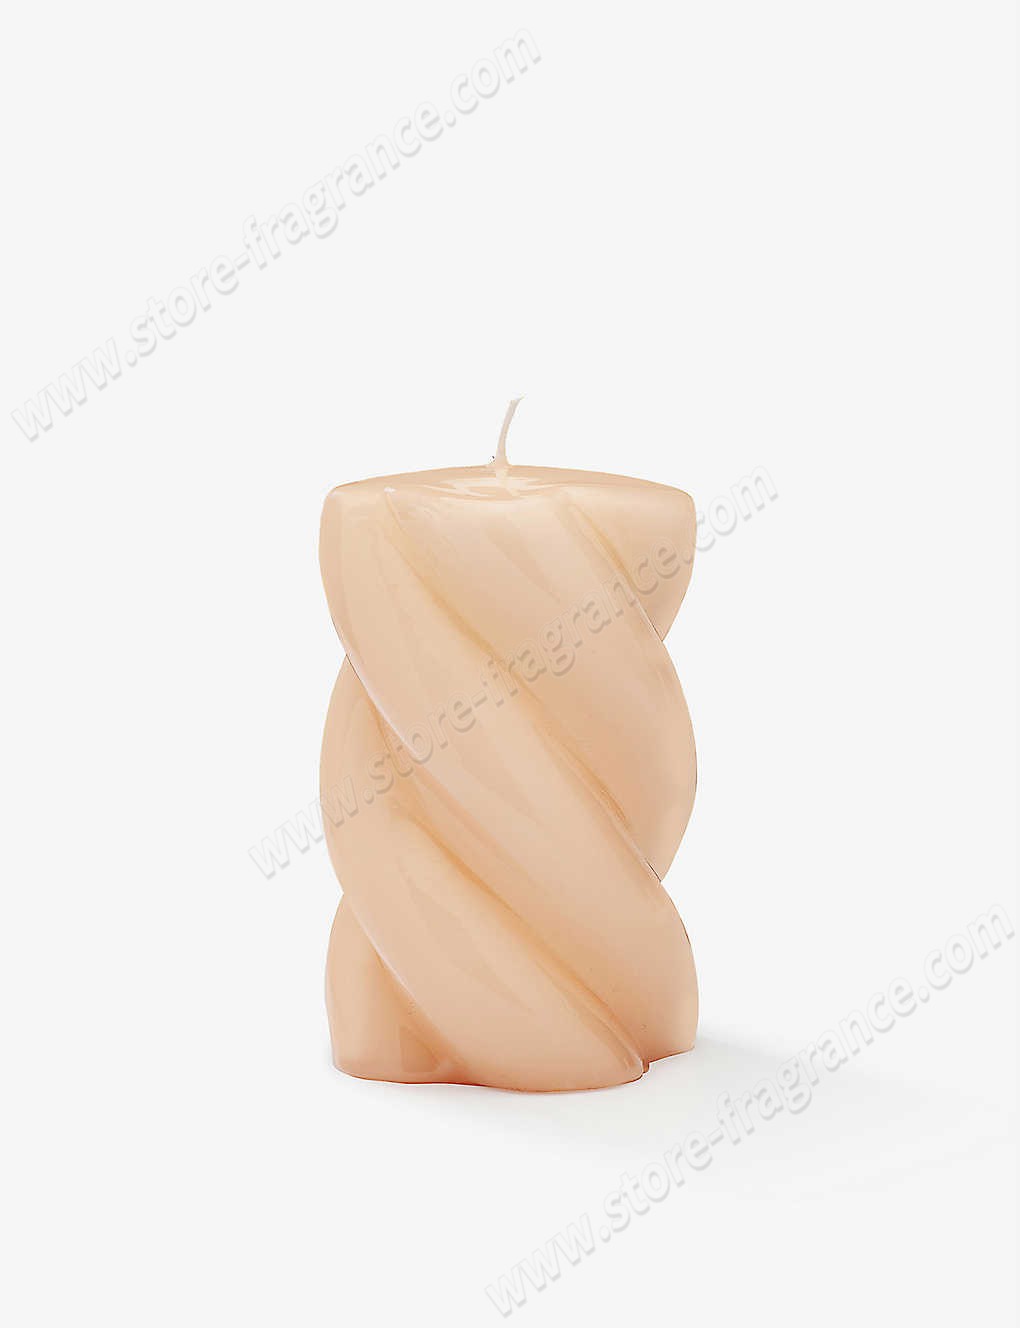 ANNA + NINA/Blunt twisted candle 10cm Limit Offer - ANNA + NINA/Blunt twisted candle 10cm Limit Offer